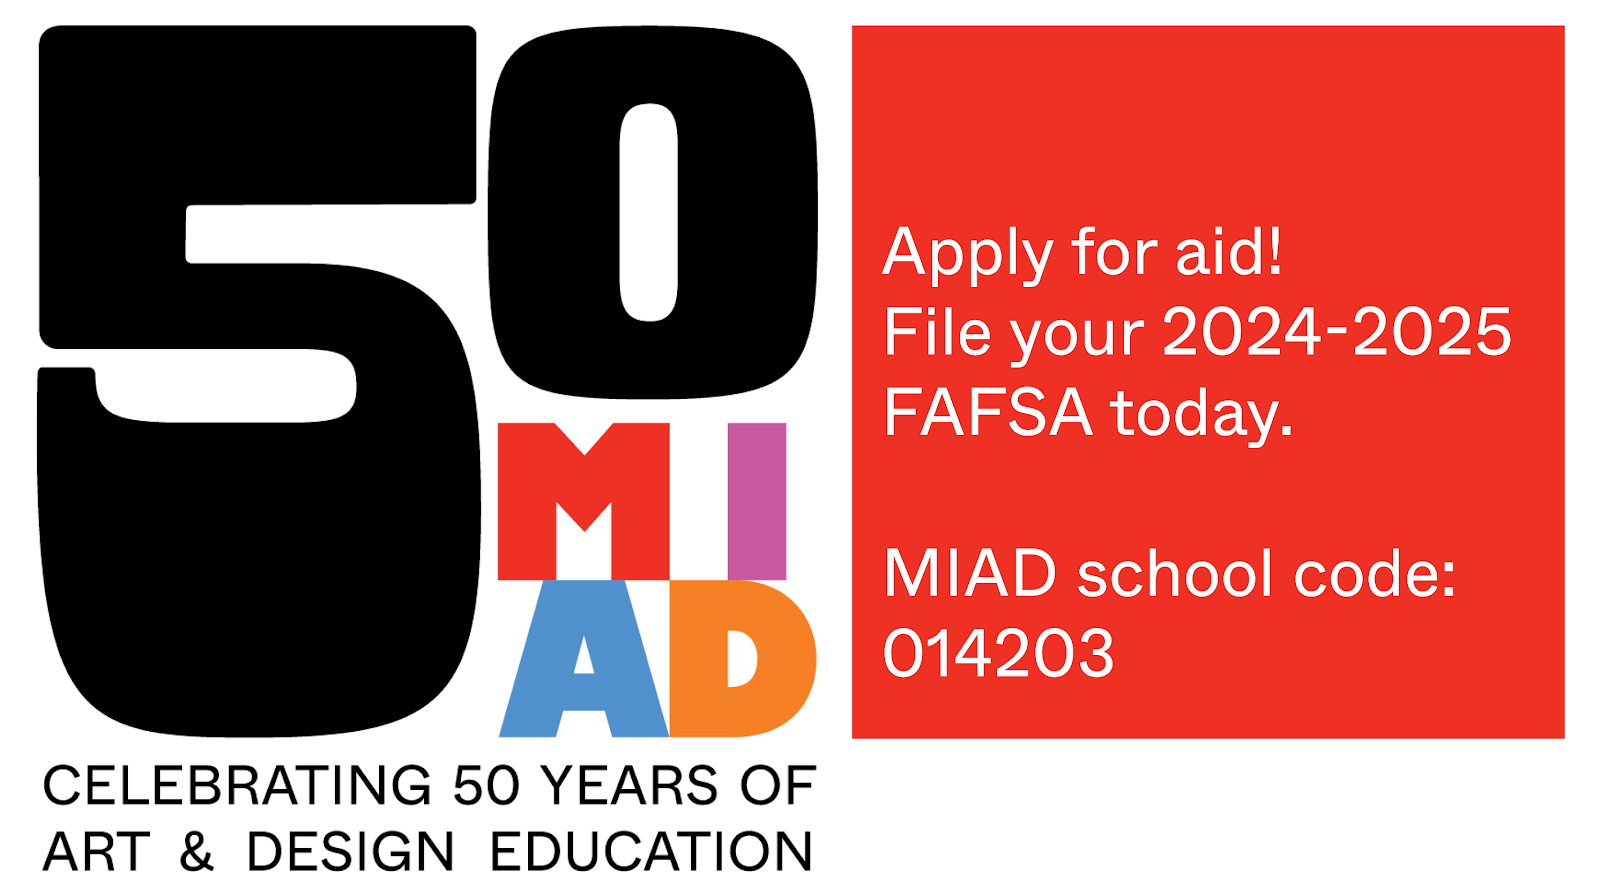 File your 2024-2025 FAFSA now!